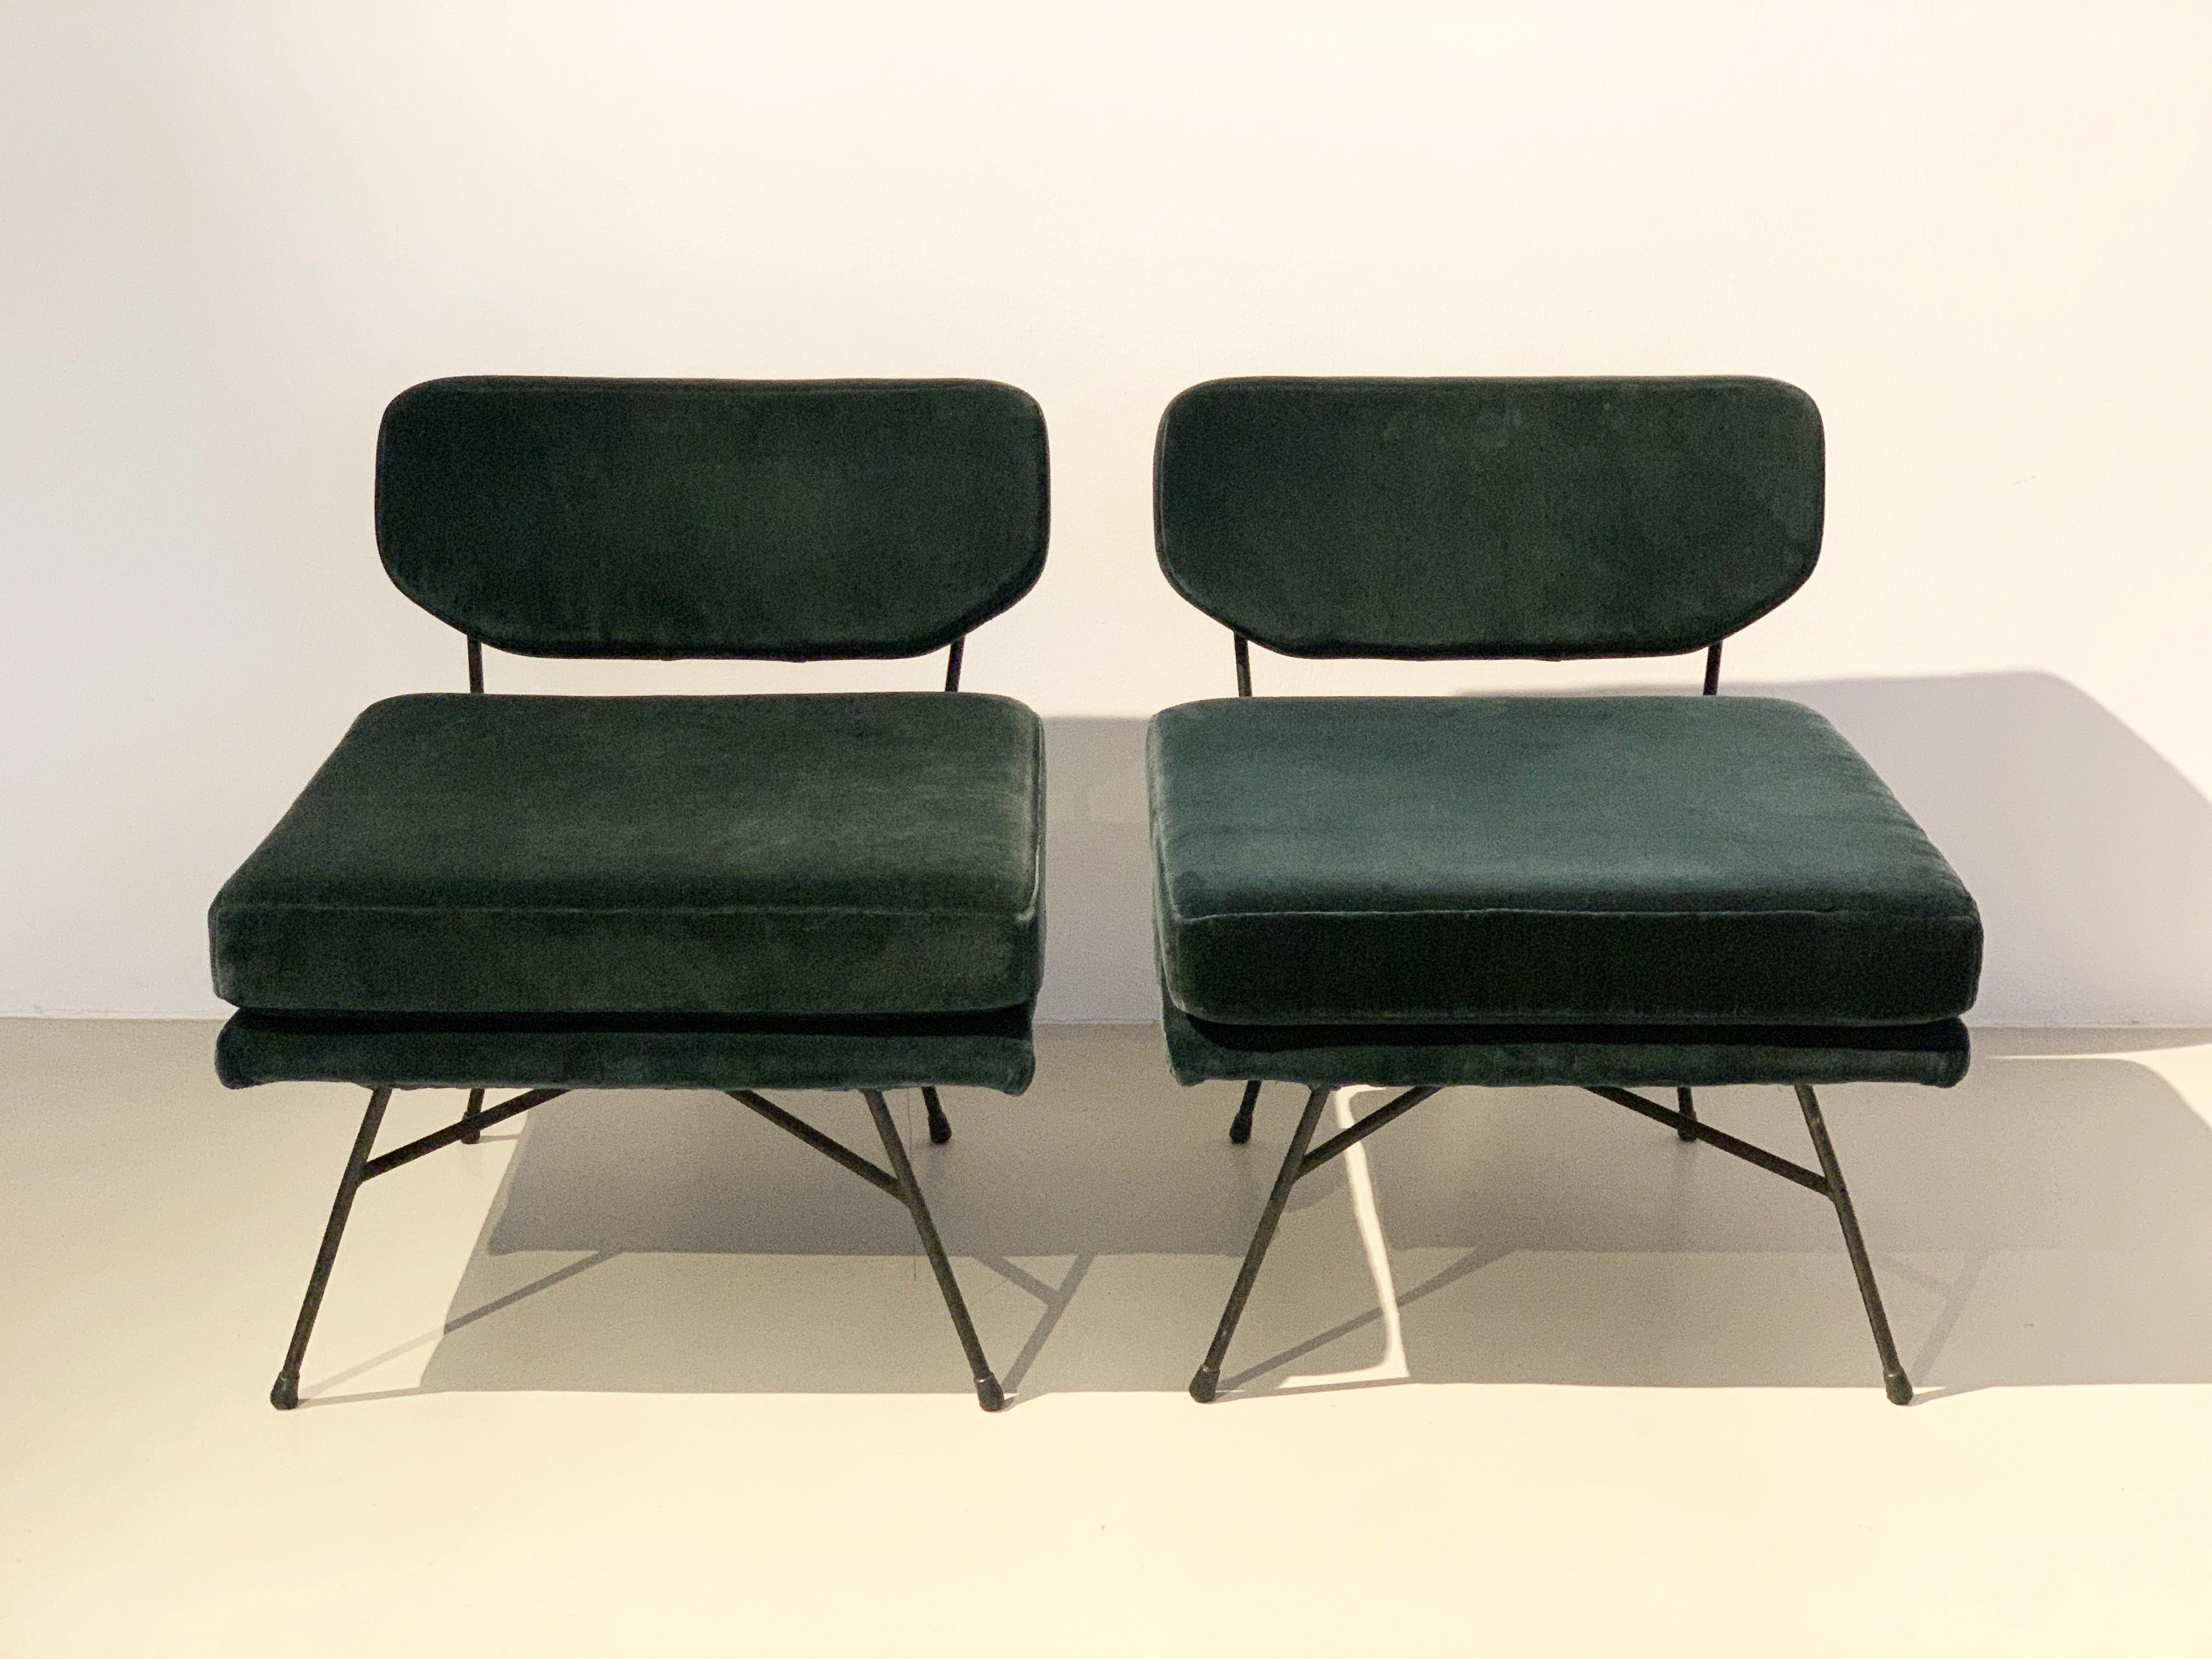 Mid-20th Century Pair 'Elettra' Lounge Chairs by BBPR, Arflex, Italy 1953, Compasso D'Oro 1954 For Sale